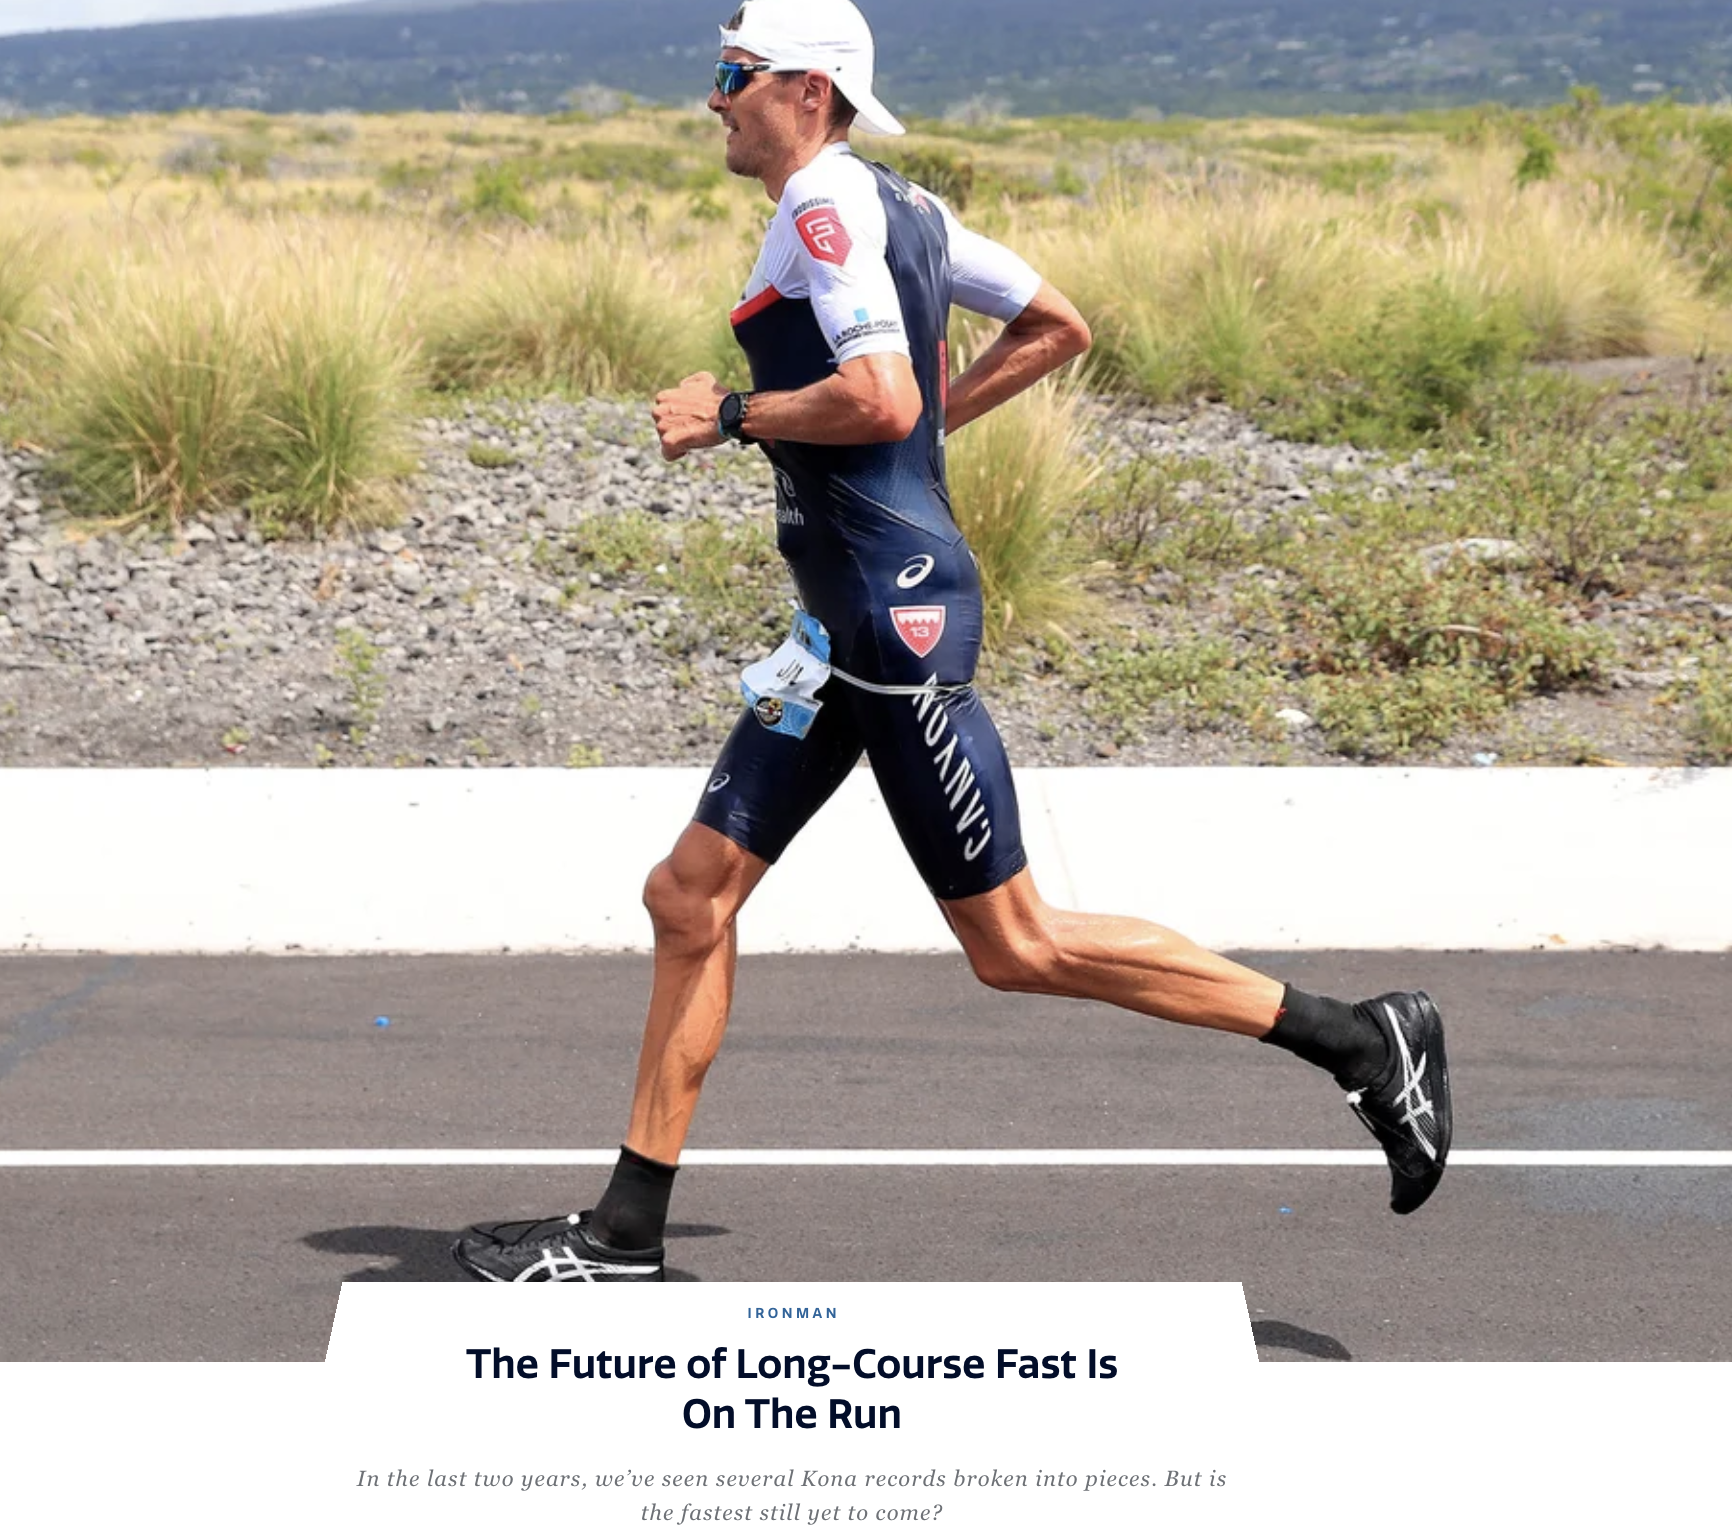 The Future of Long-Course Fast Is On The Run